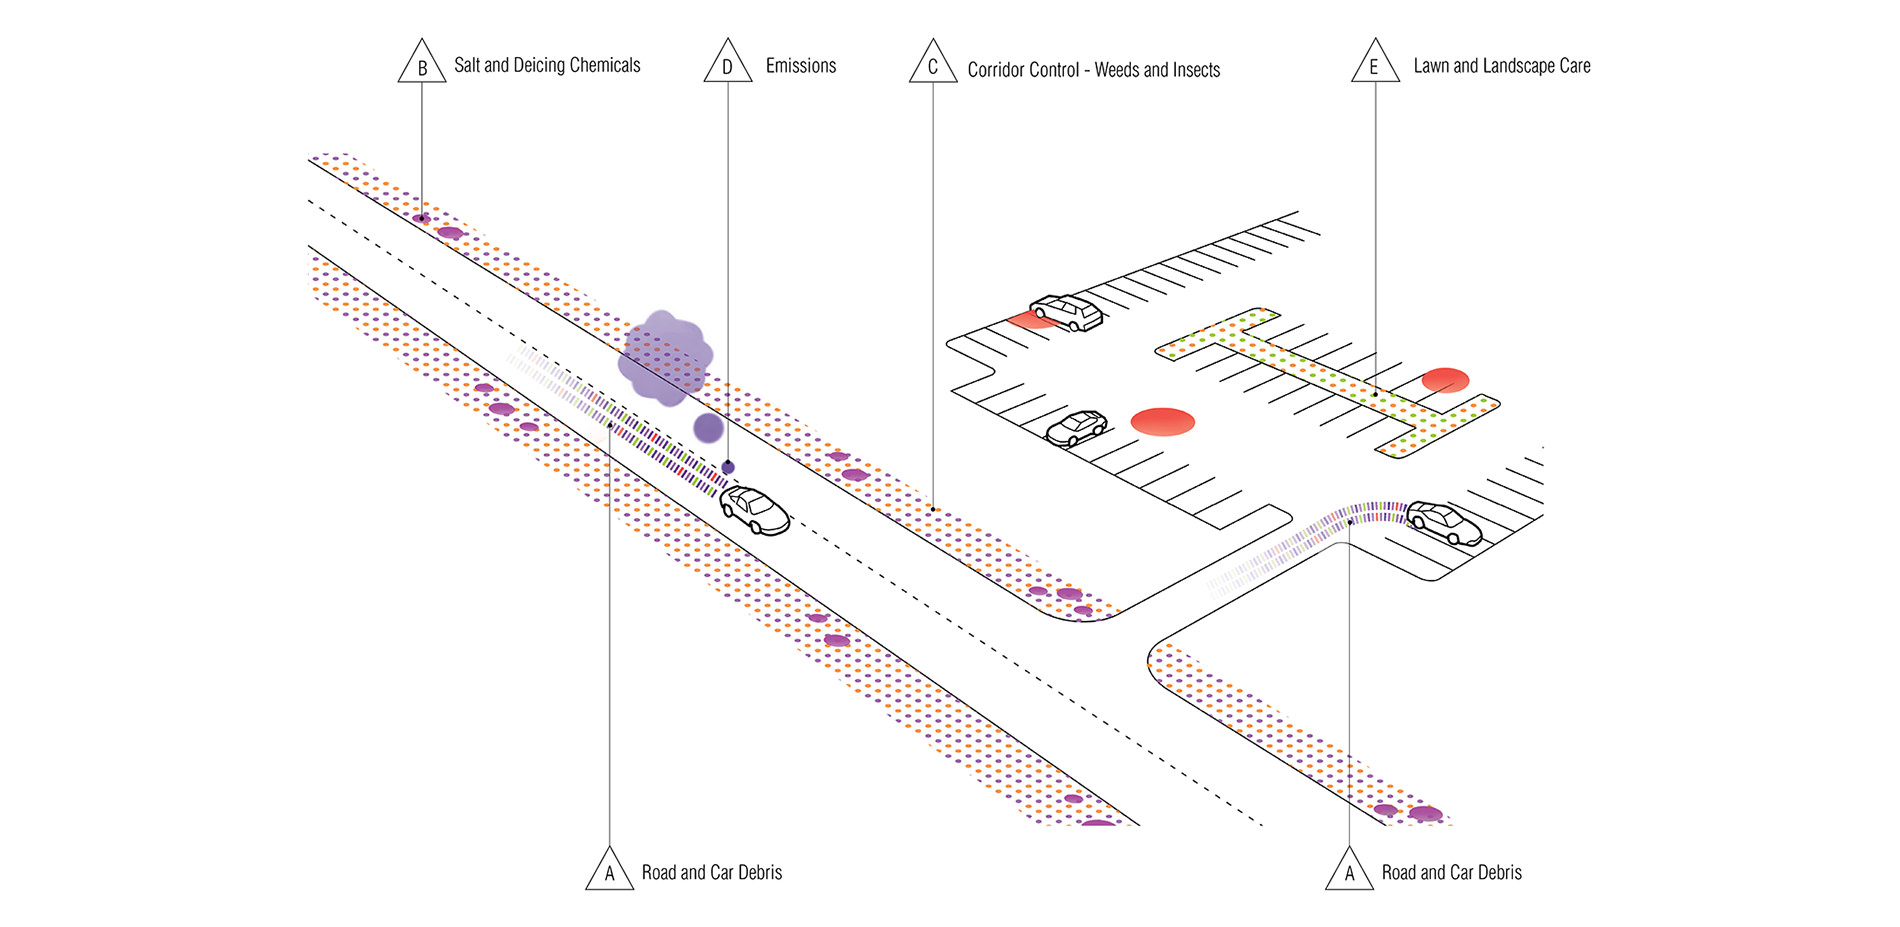 Roadways and Parking Lots: Sources of Contamination Illustration